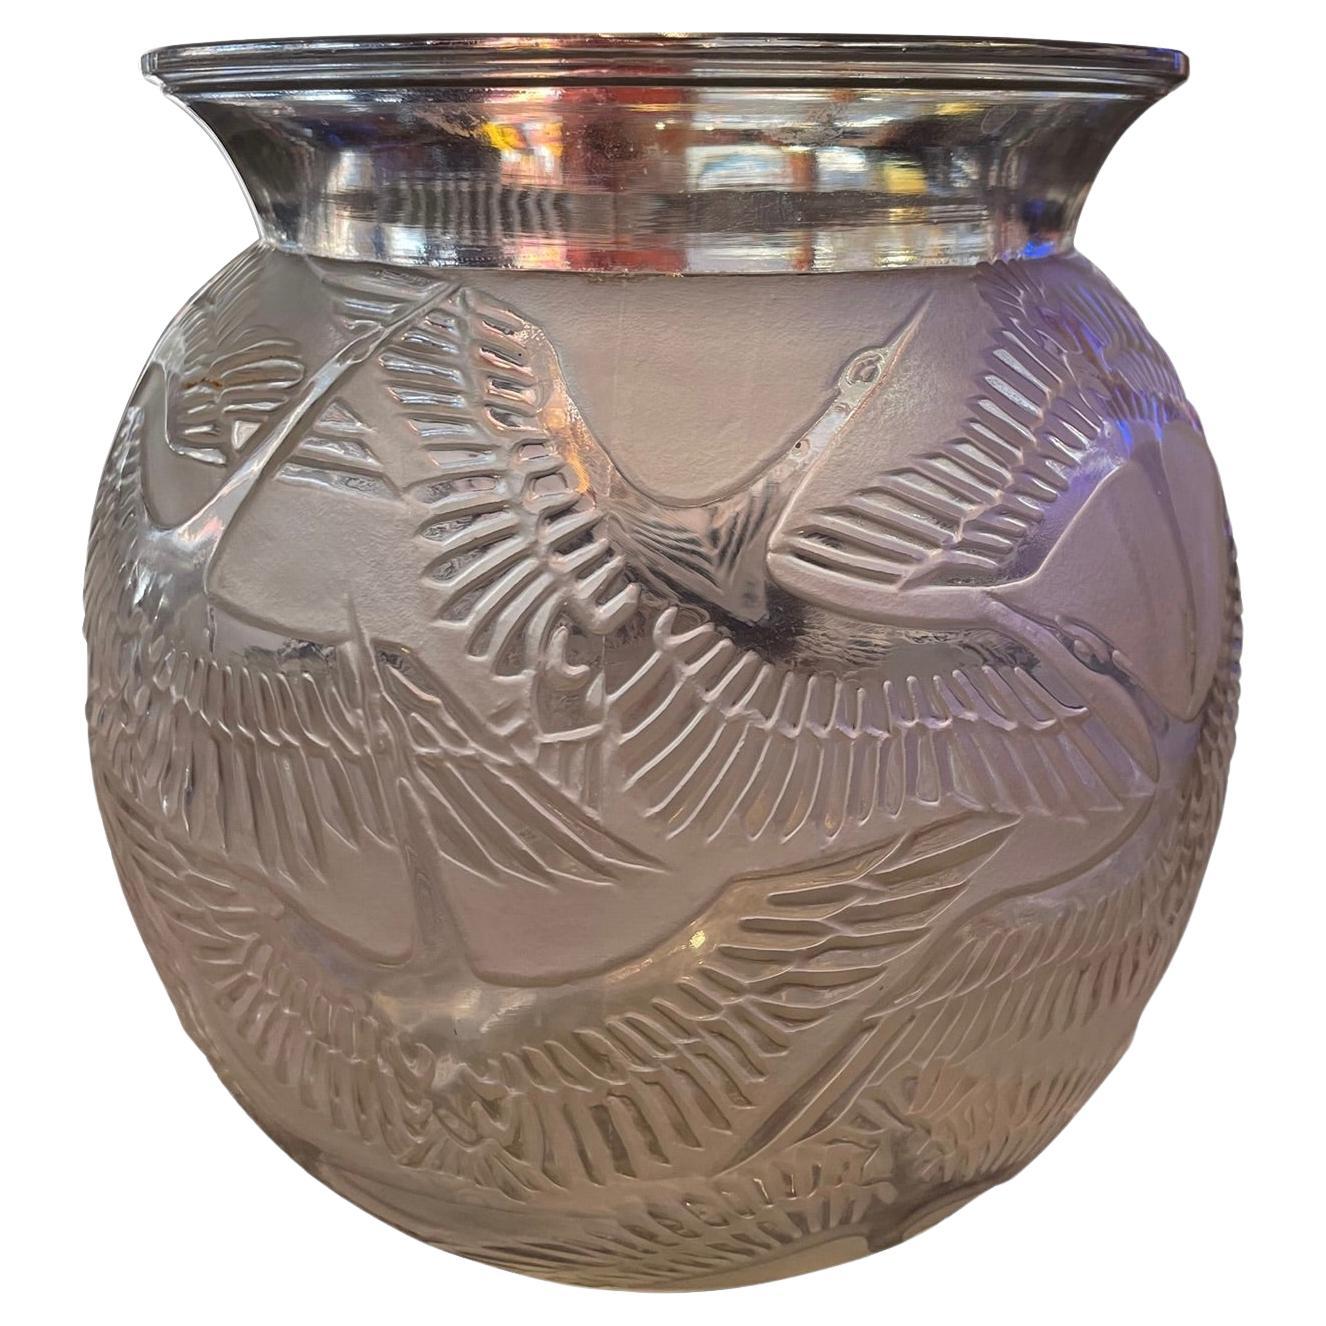 Lalique "Cigogne" Vase From the Linda Ronstadt Collection